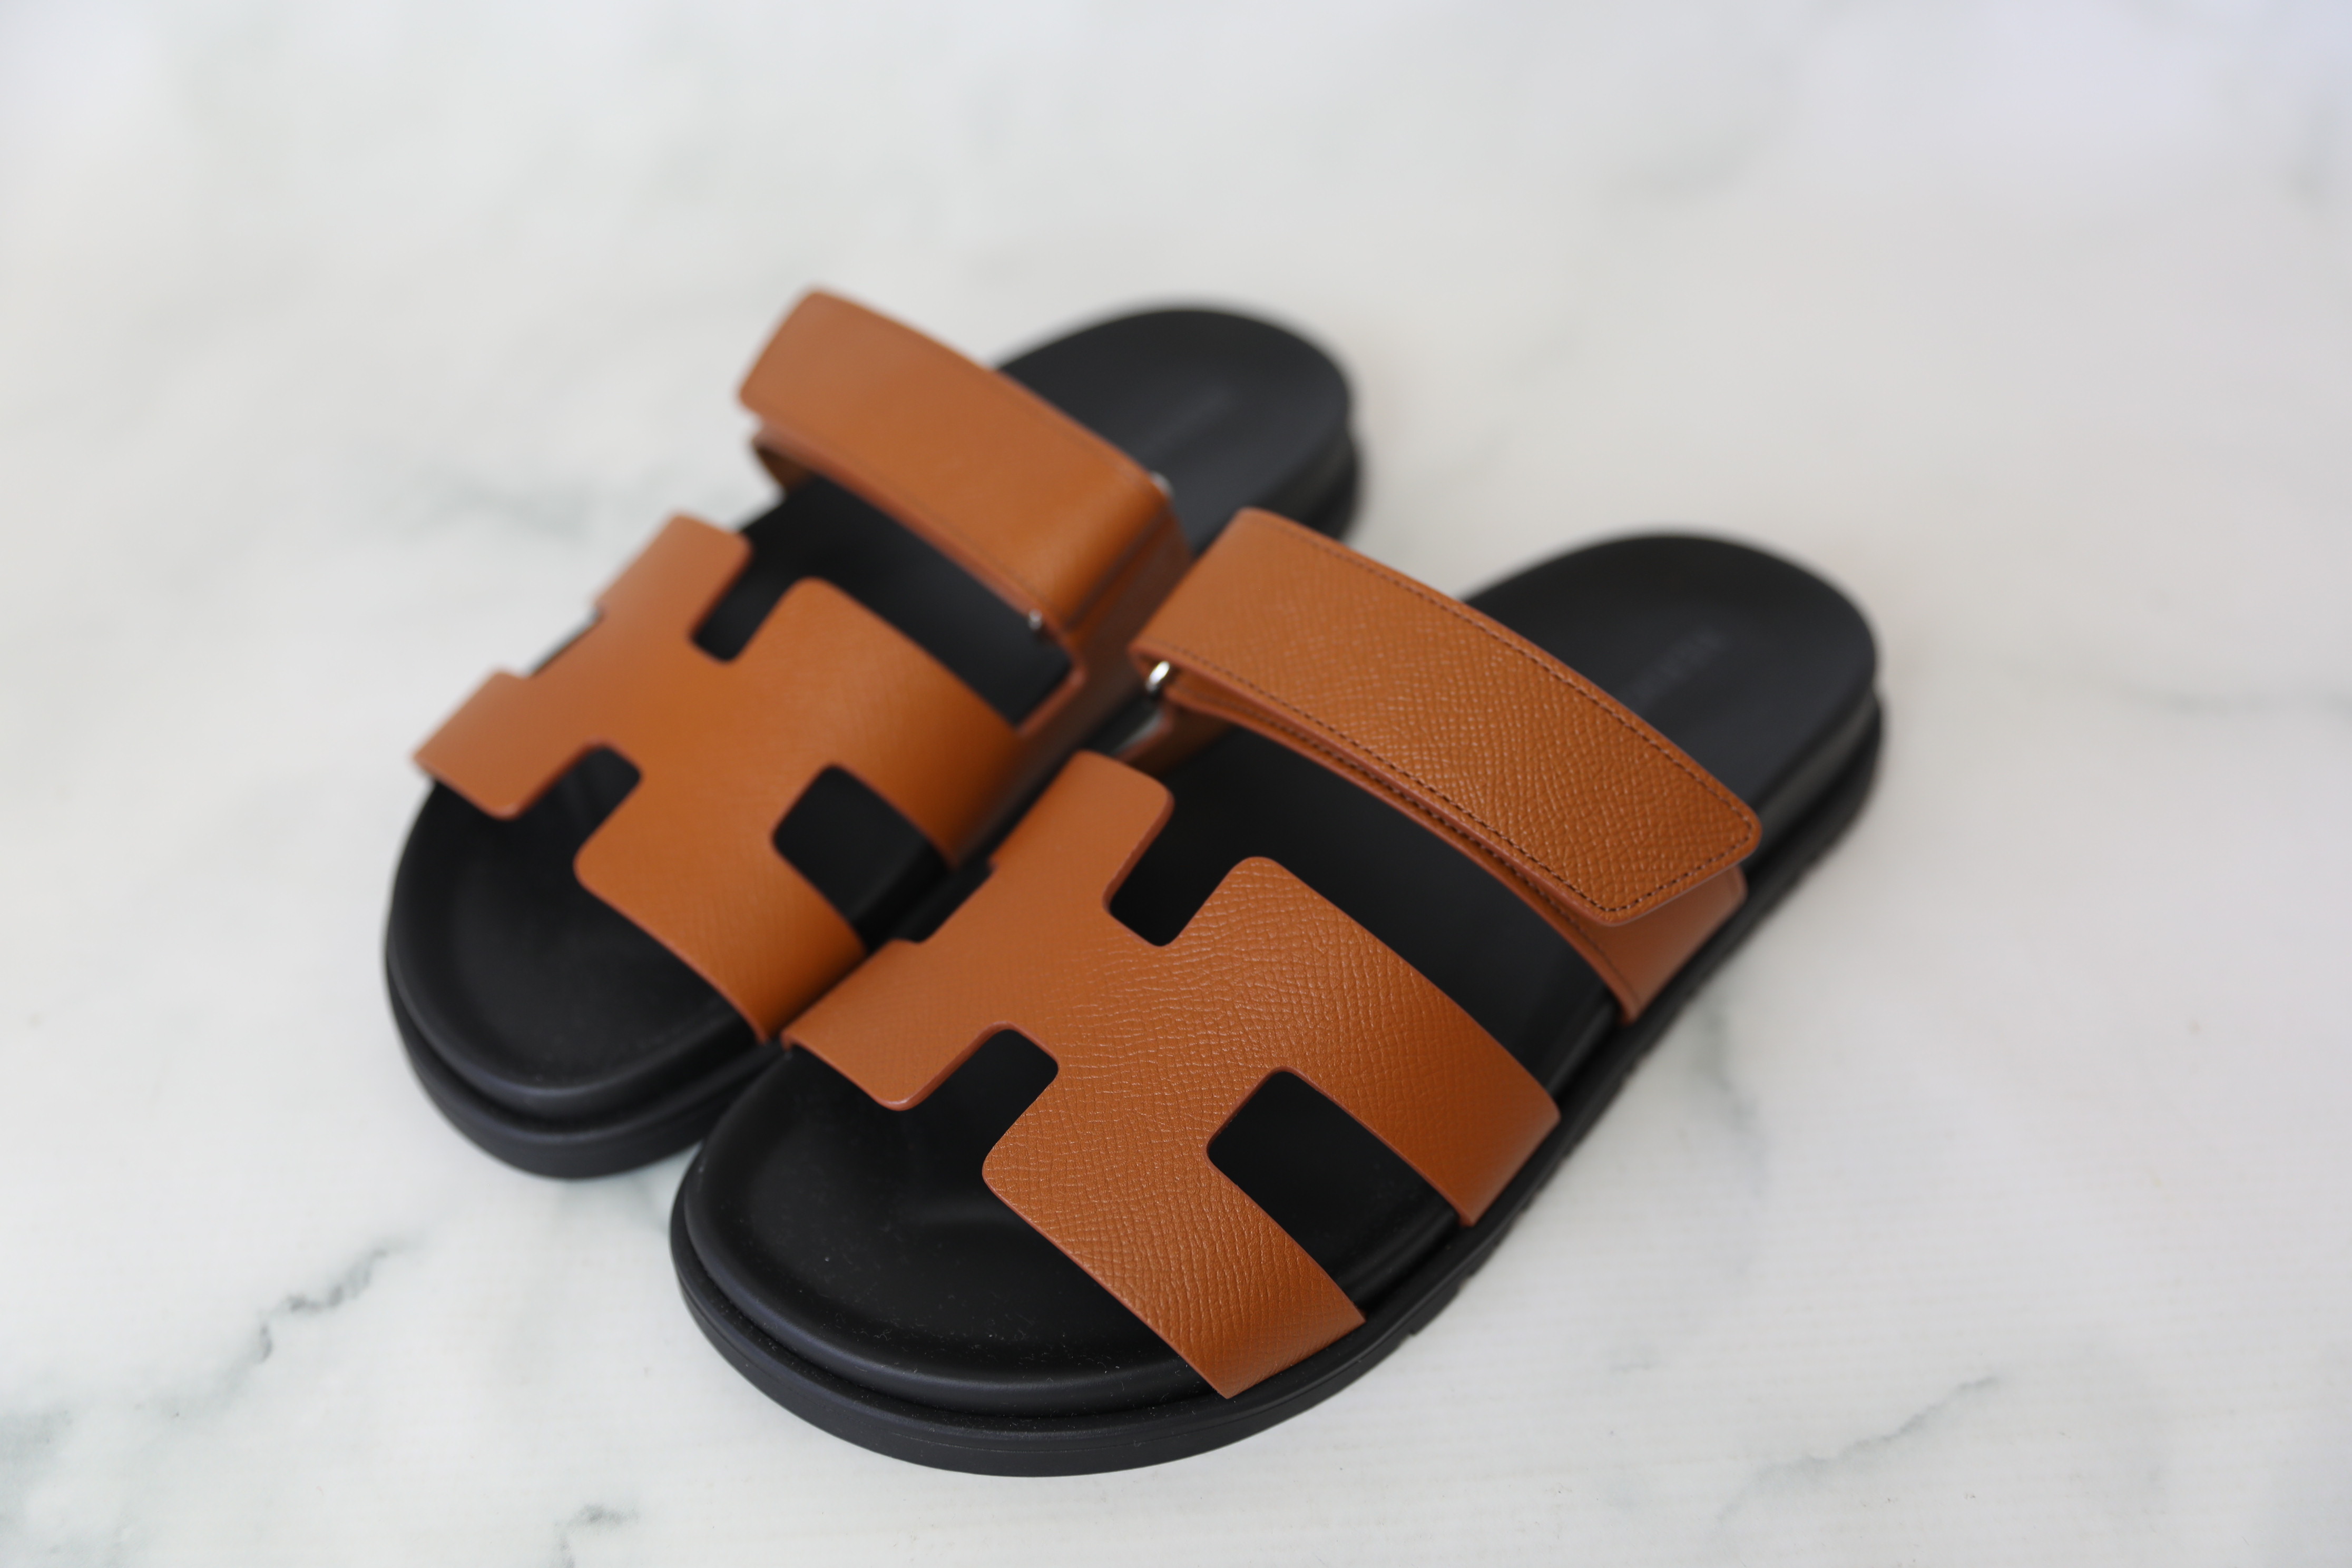 HERMÈS CHYPRE SANDALS REVIEW, SIZING & TRY-ON 